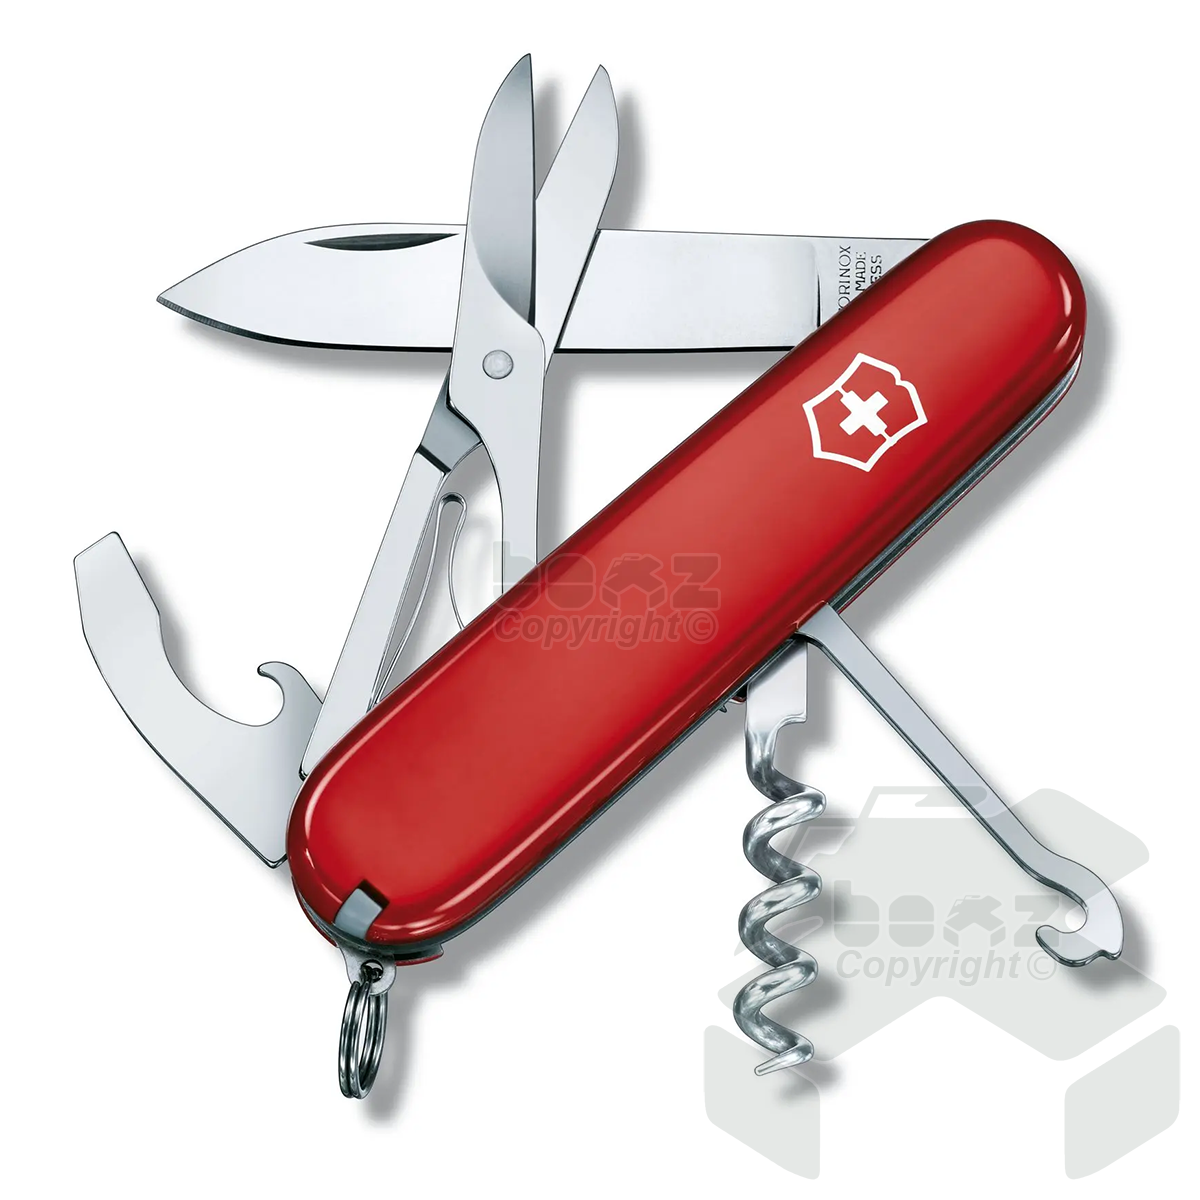 Victorinox Compact UK Legal Carry